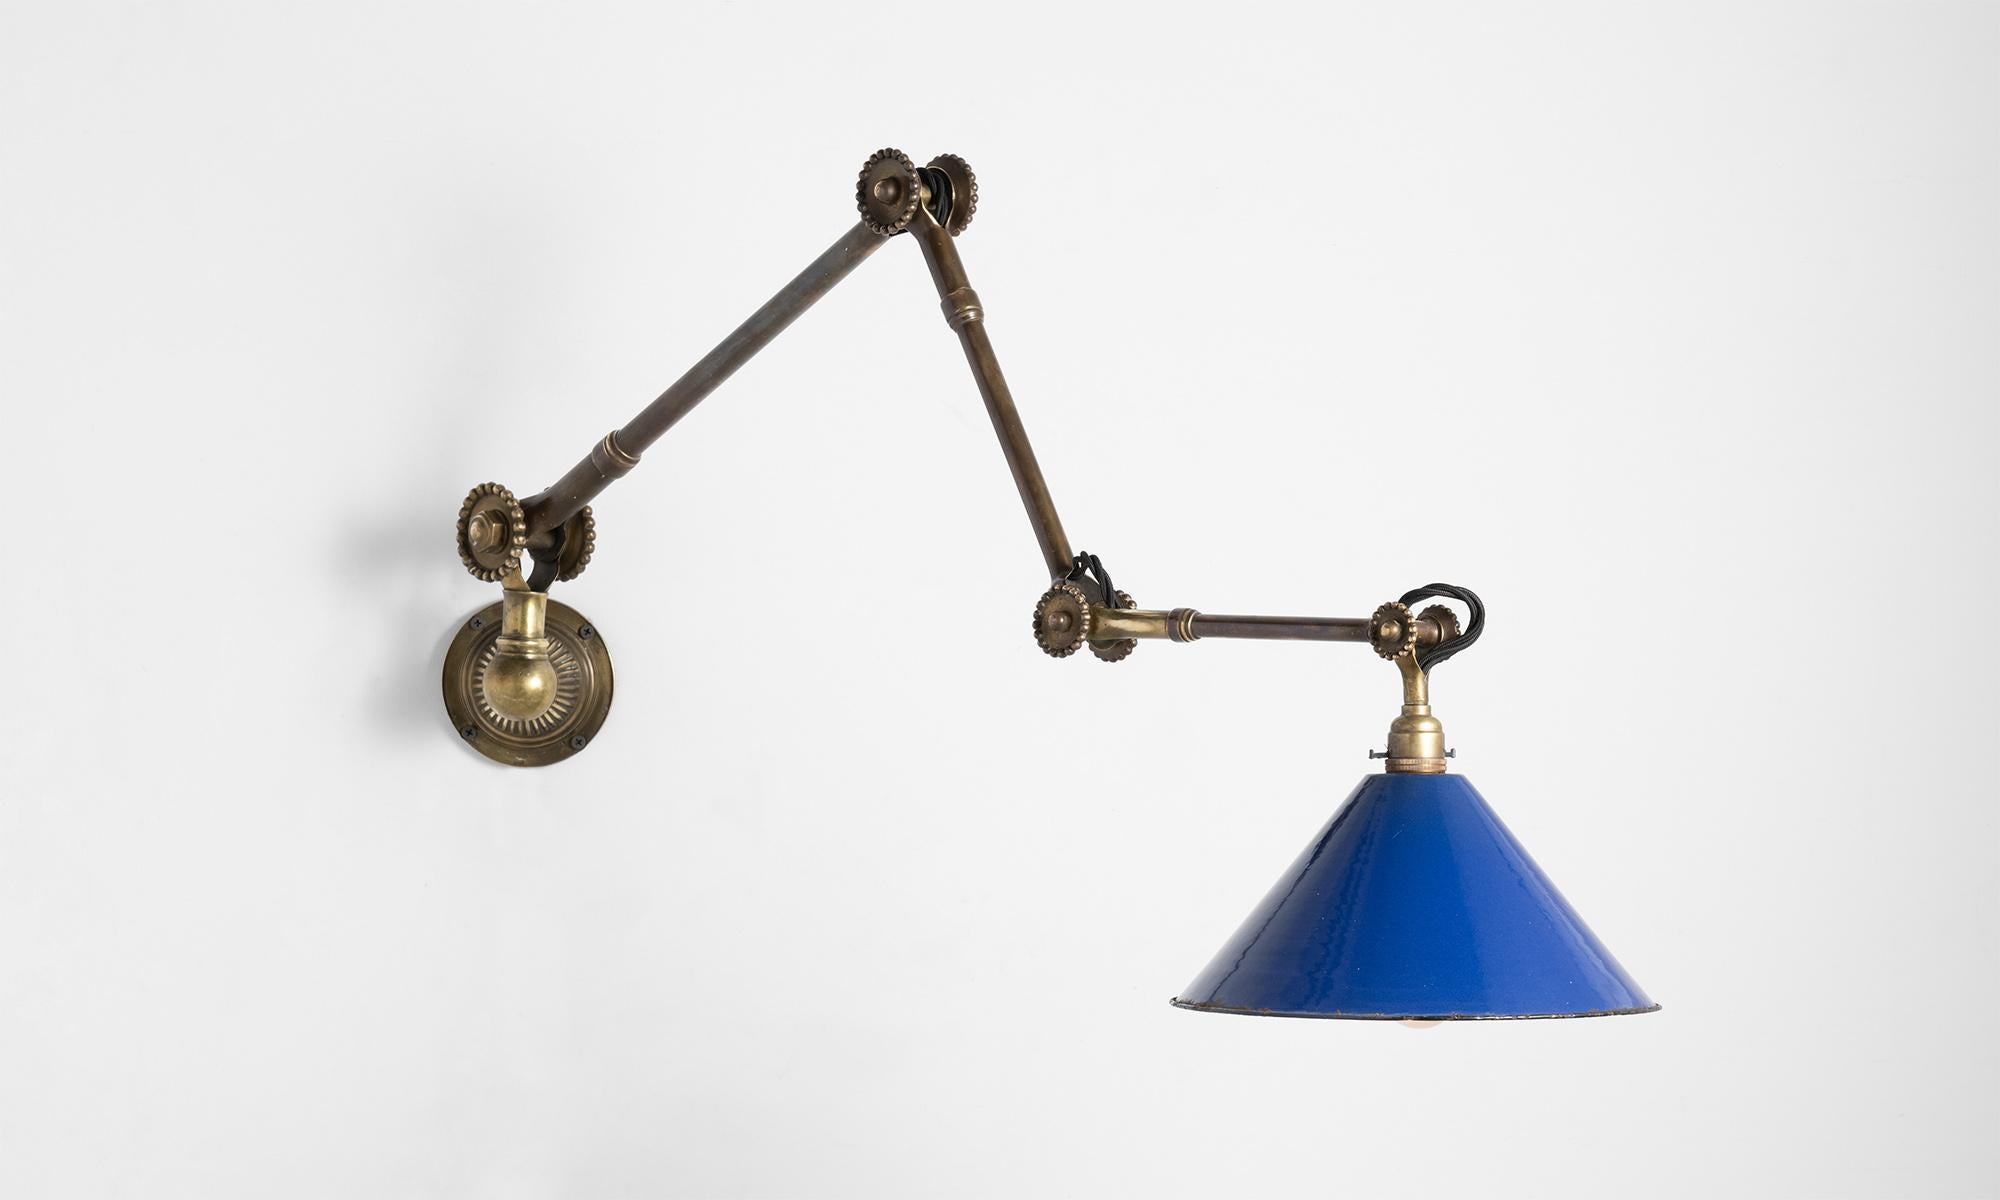 Large-scale articulating light with Daisy joints, blue shade and makers mark stamped into the base. Can be mounted to the wall, or to a desk.